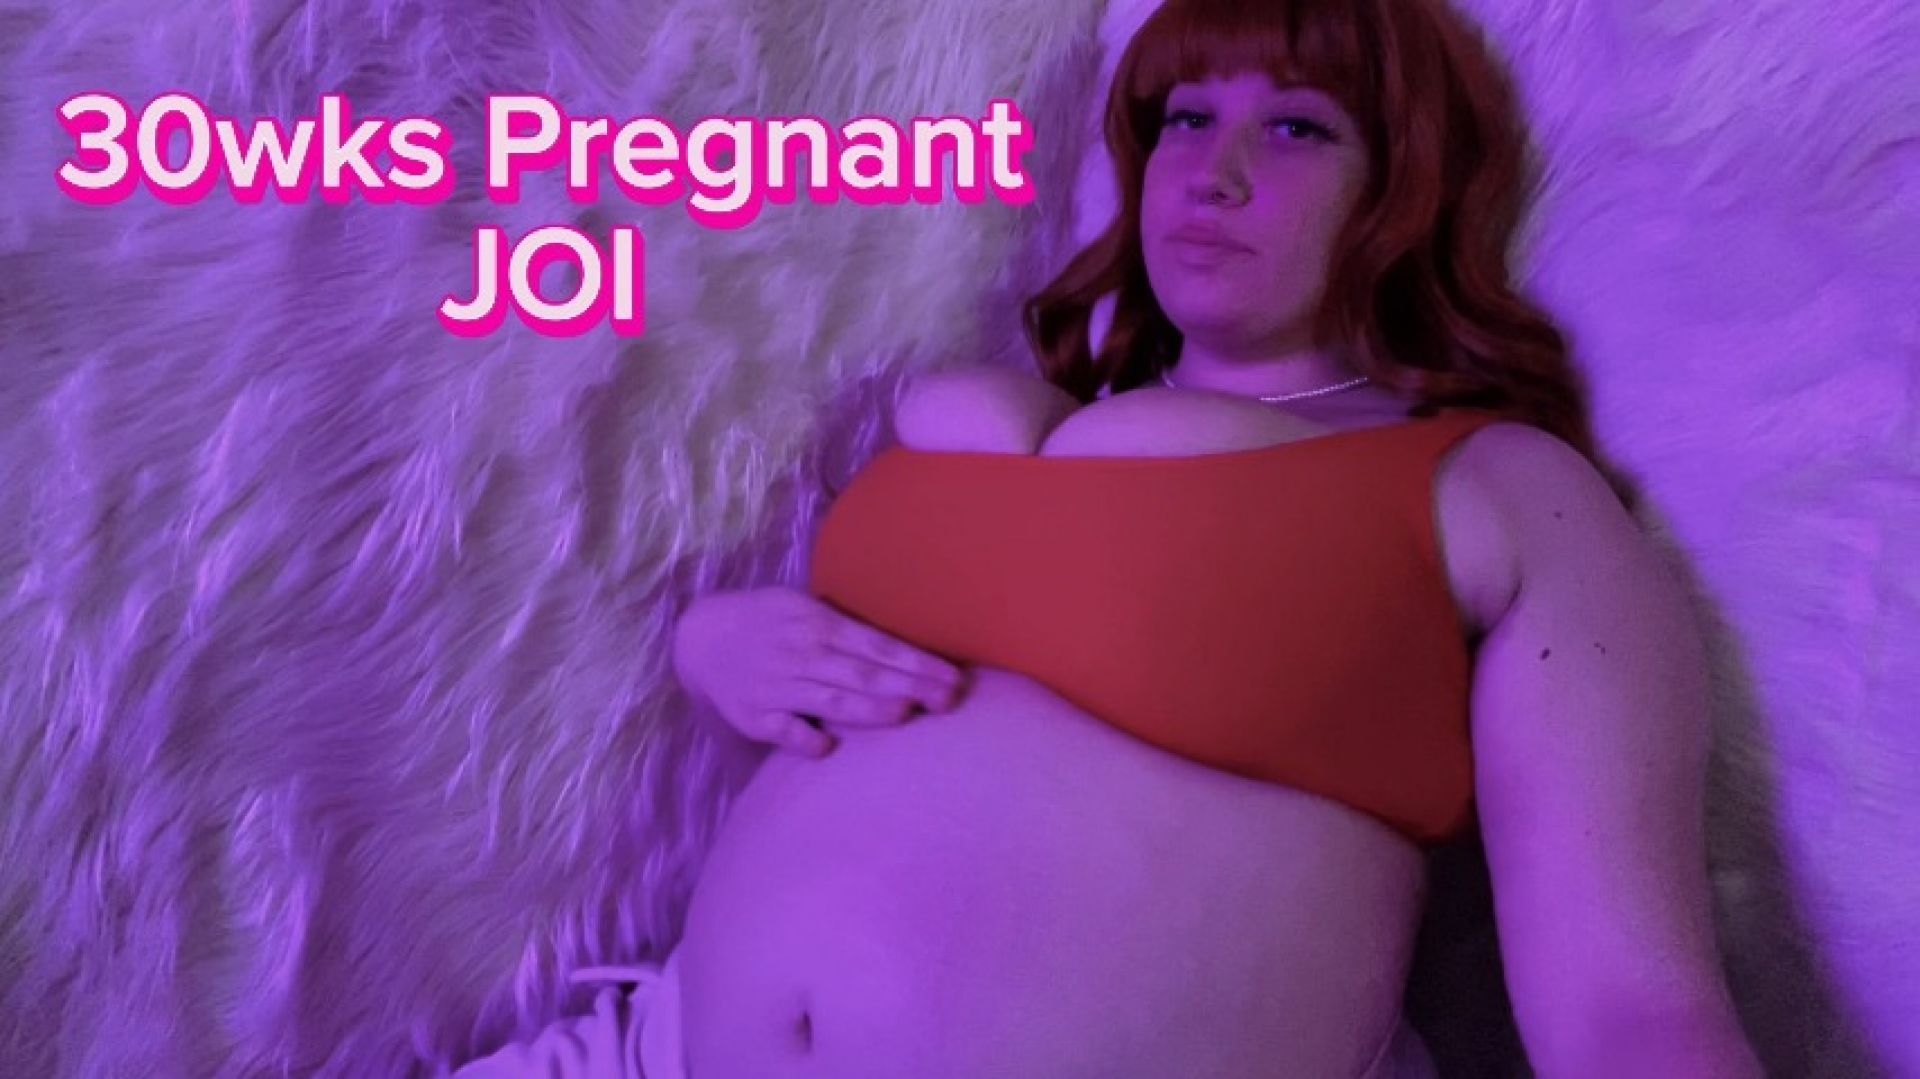 30 weeks Pregnant JOI